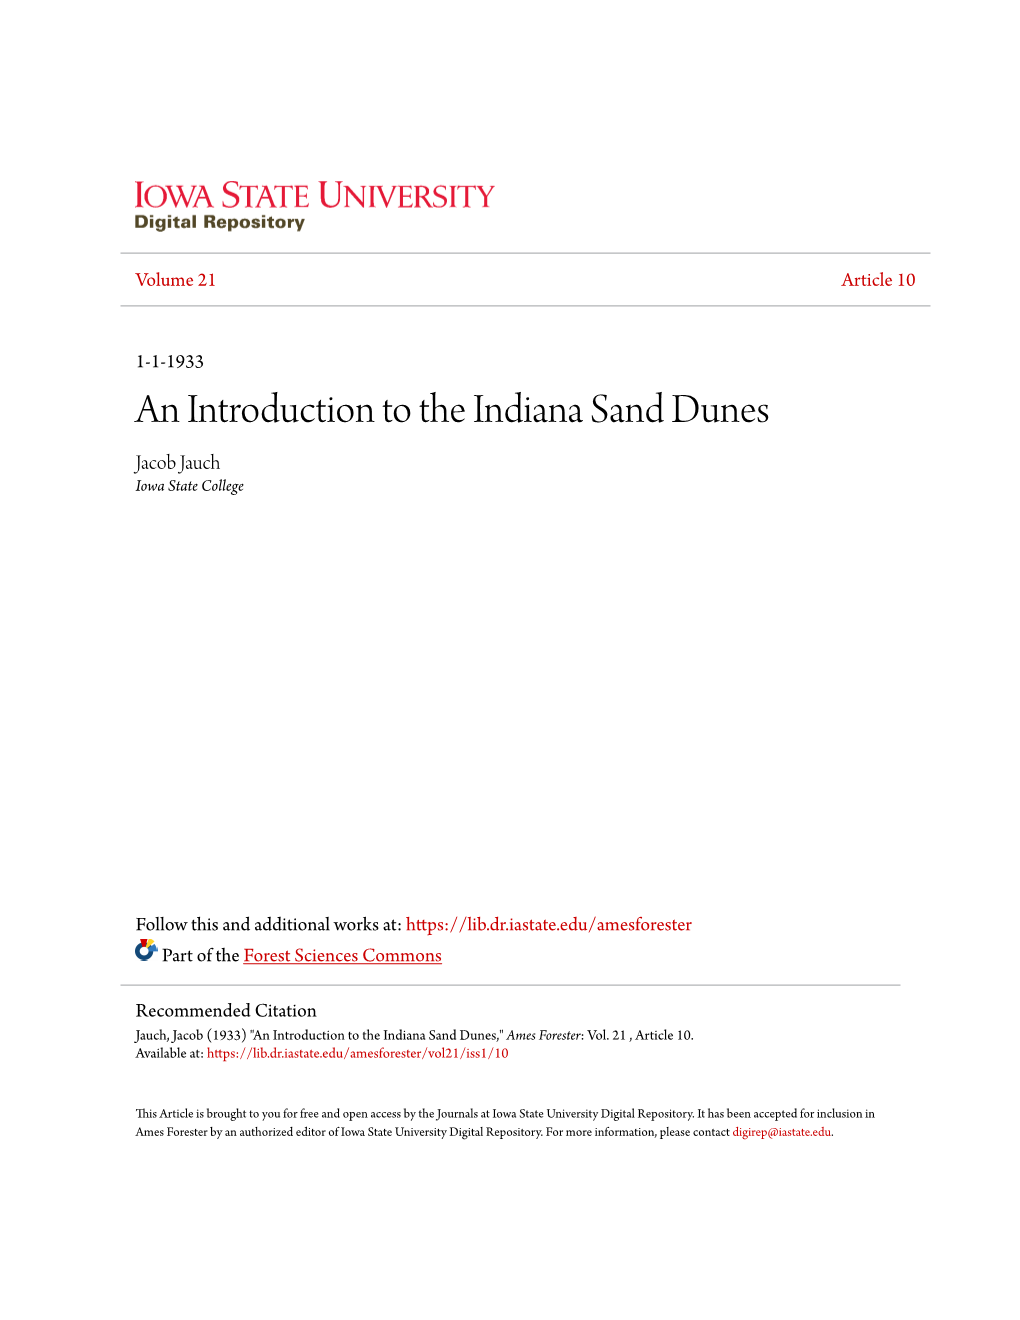 An Introduction to the Indiana Sand Dunes Jacob Jauch Iowa State College